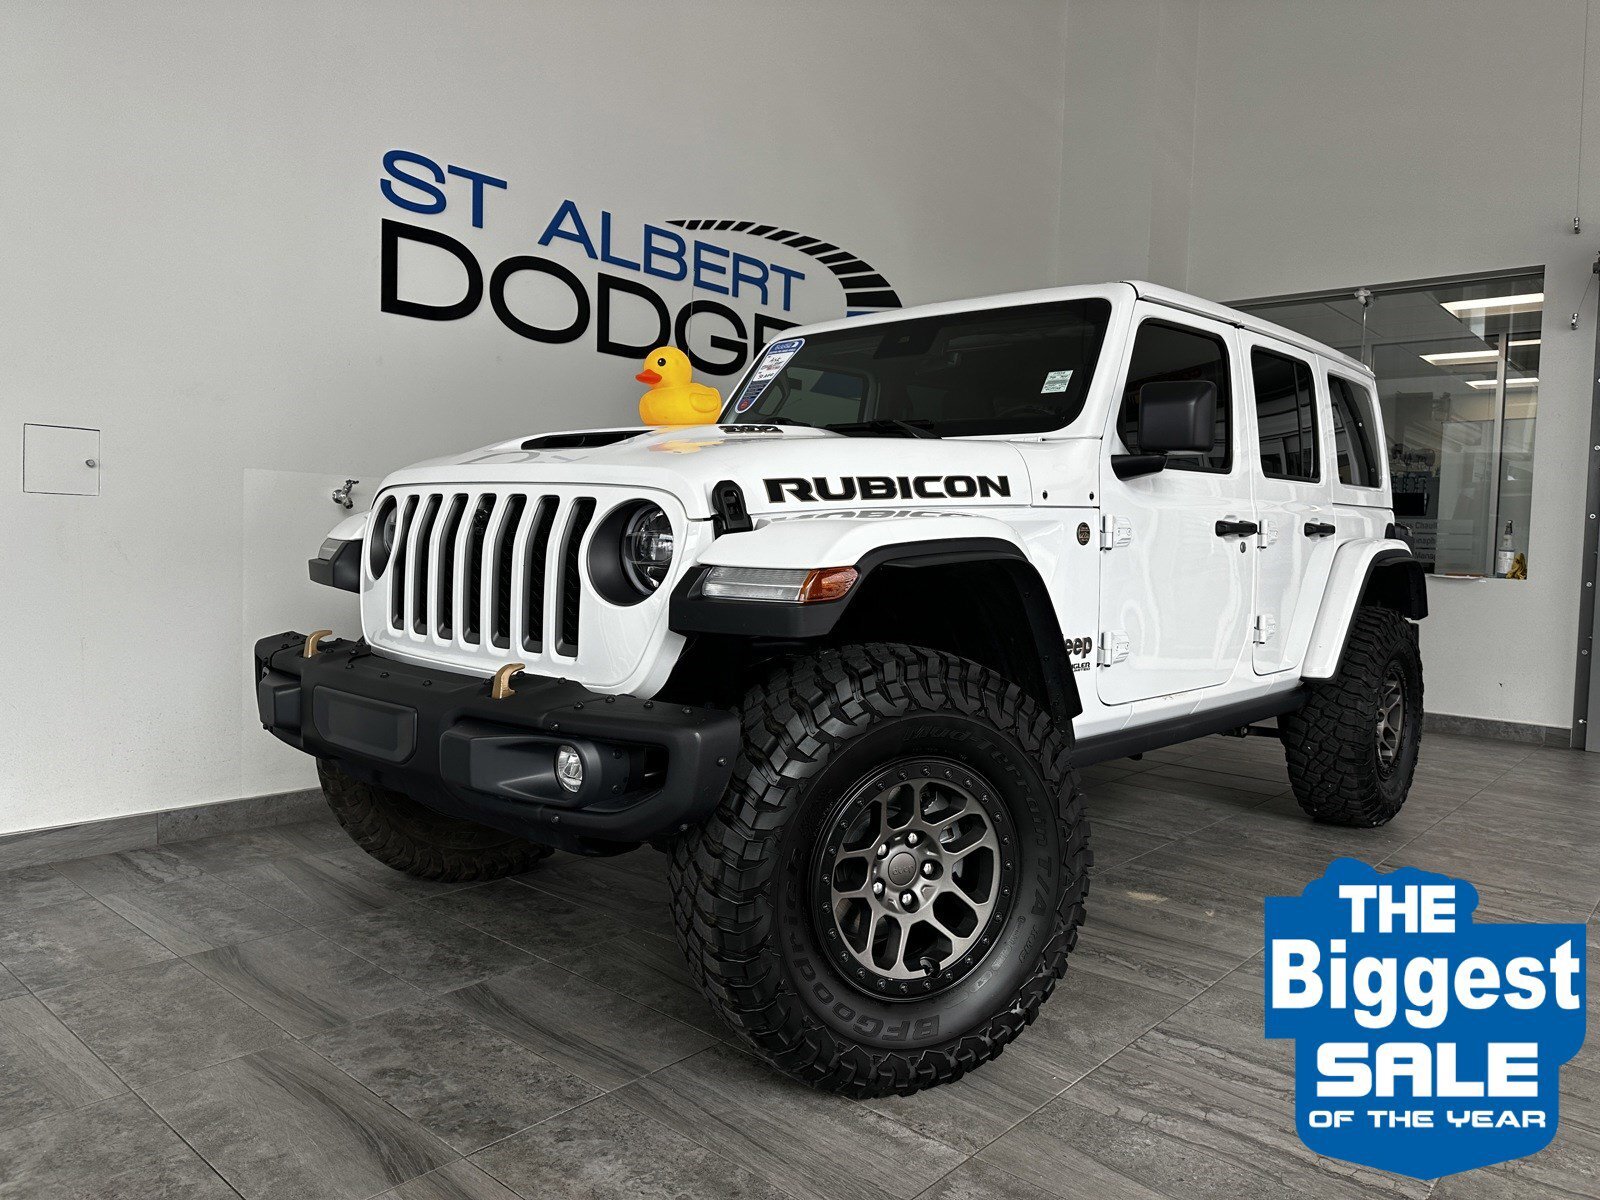 2022 Jeep Wrangler Unlimited Rubicon 392| XTREME 35 TIRE PACKAGE |